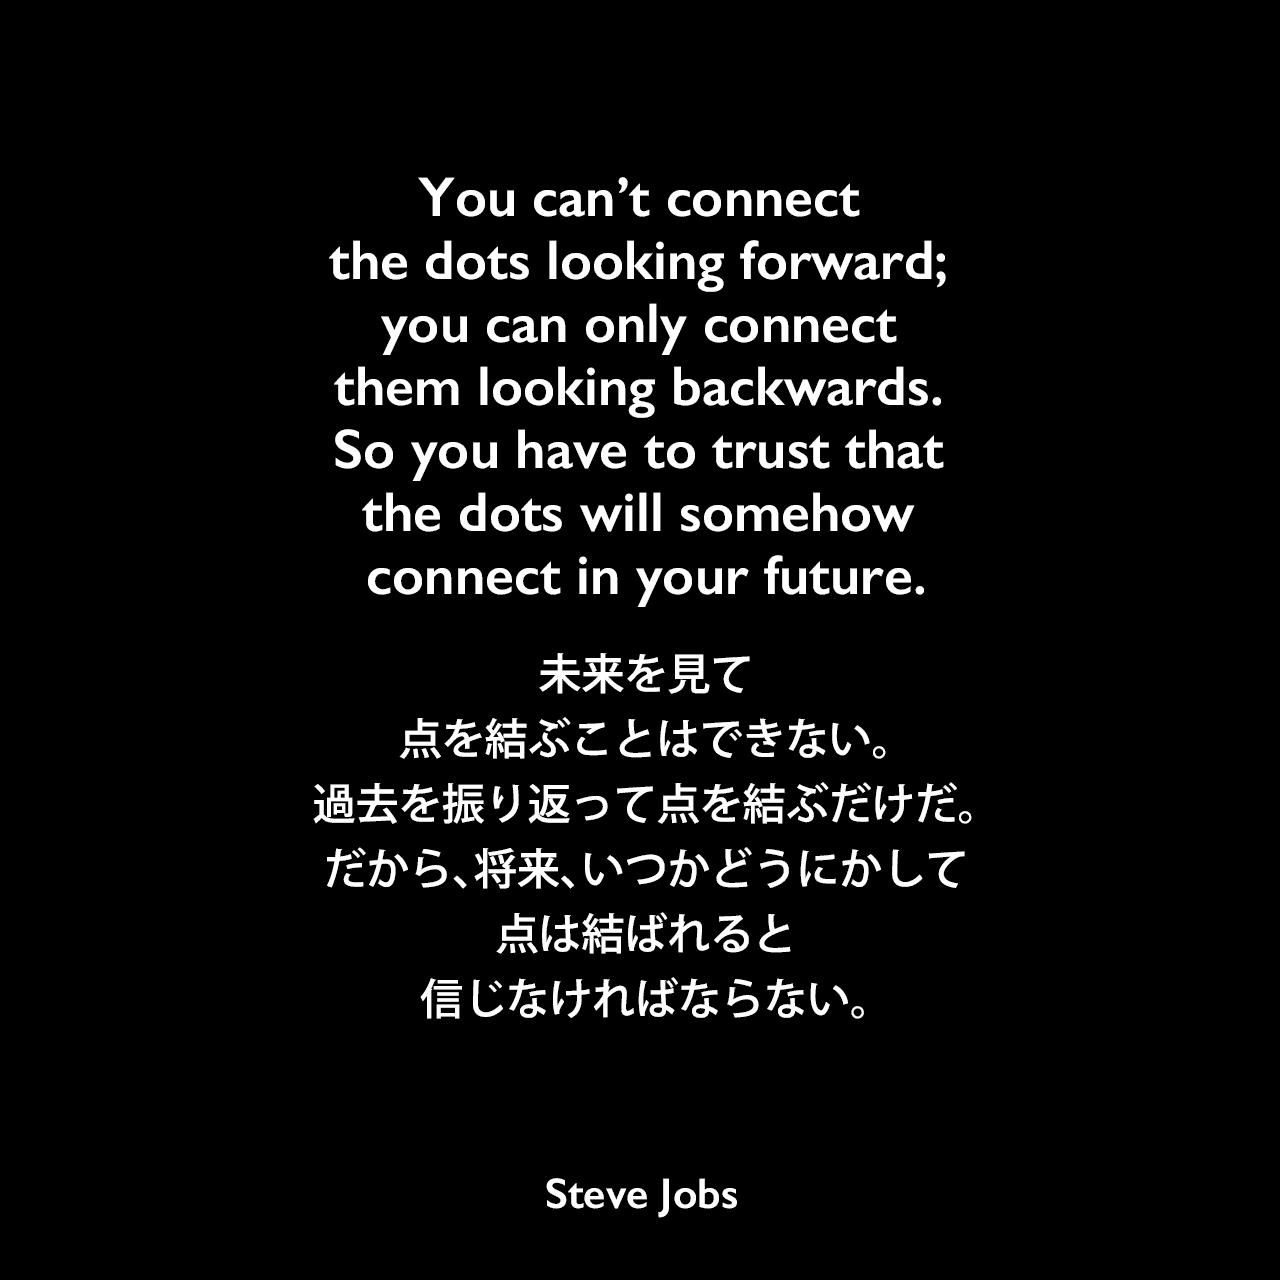 You can’t connect the dots looking forward; you can only connect them looking backwards. So you have to trust that the dots will somehow connect in your future.未来を見て、点を結ぶことはできない。過去を振り返って点を結ぶだけだ。だから、将来、いつかどうにかして点は結ばれると 信じなければならない。- 2005年6月12日 スタンフォード大学卒業式でのスピーチよりSteve Jobs